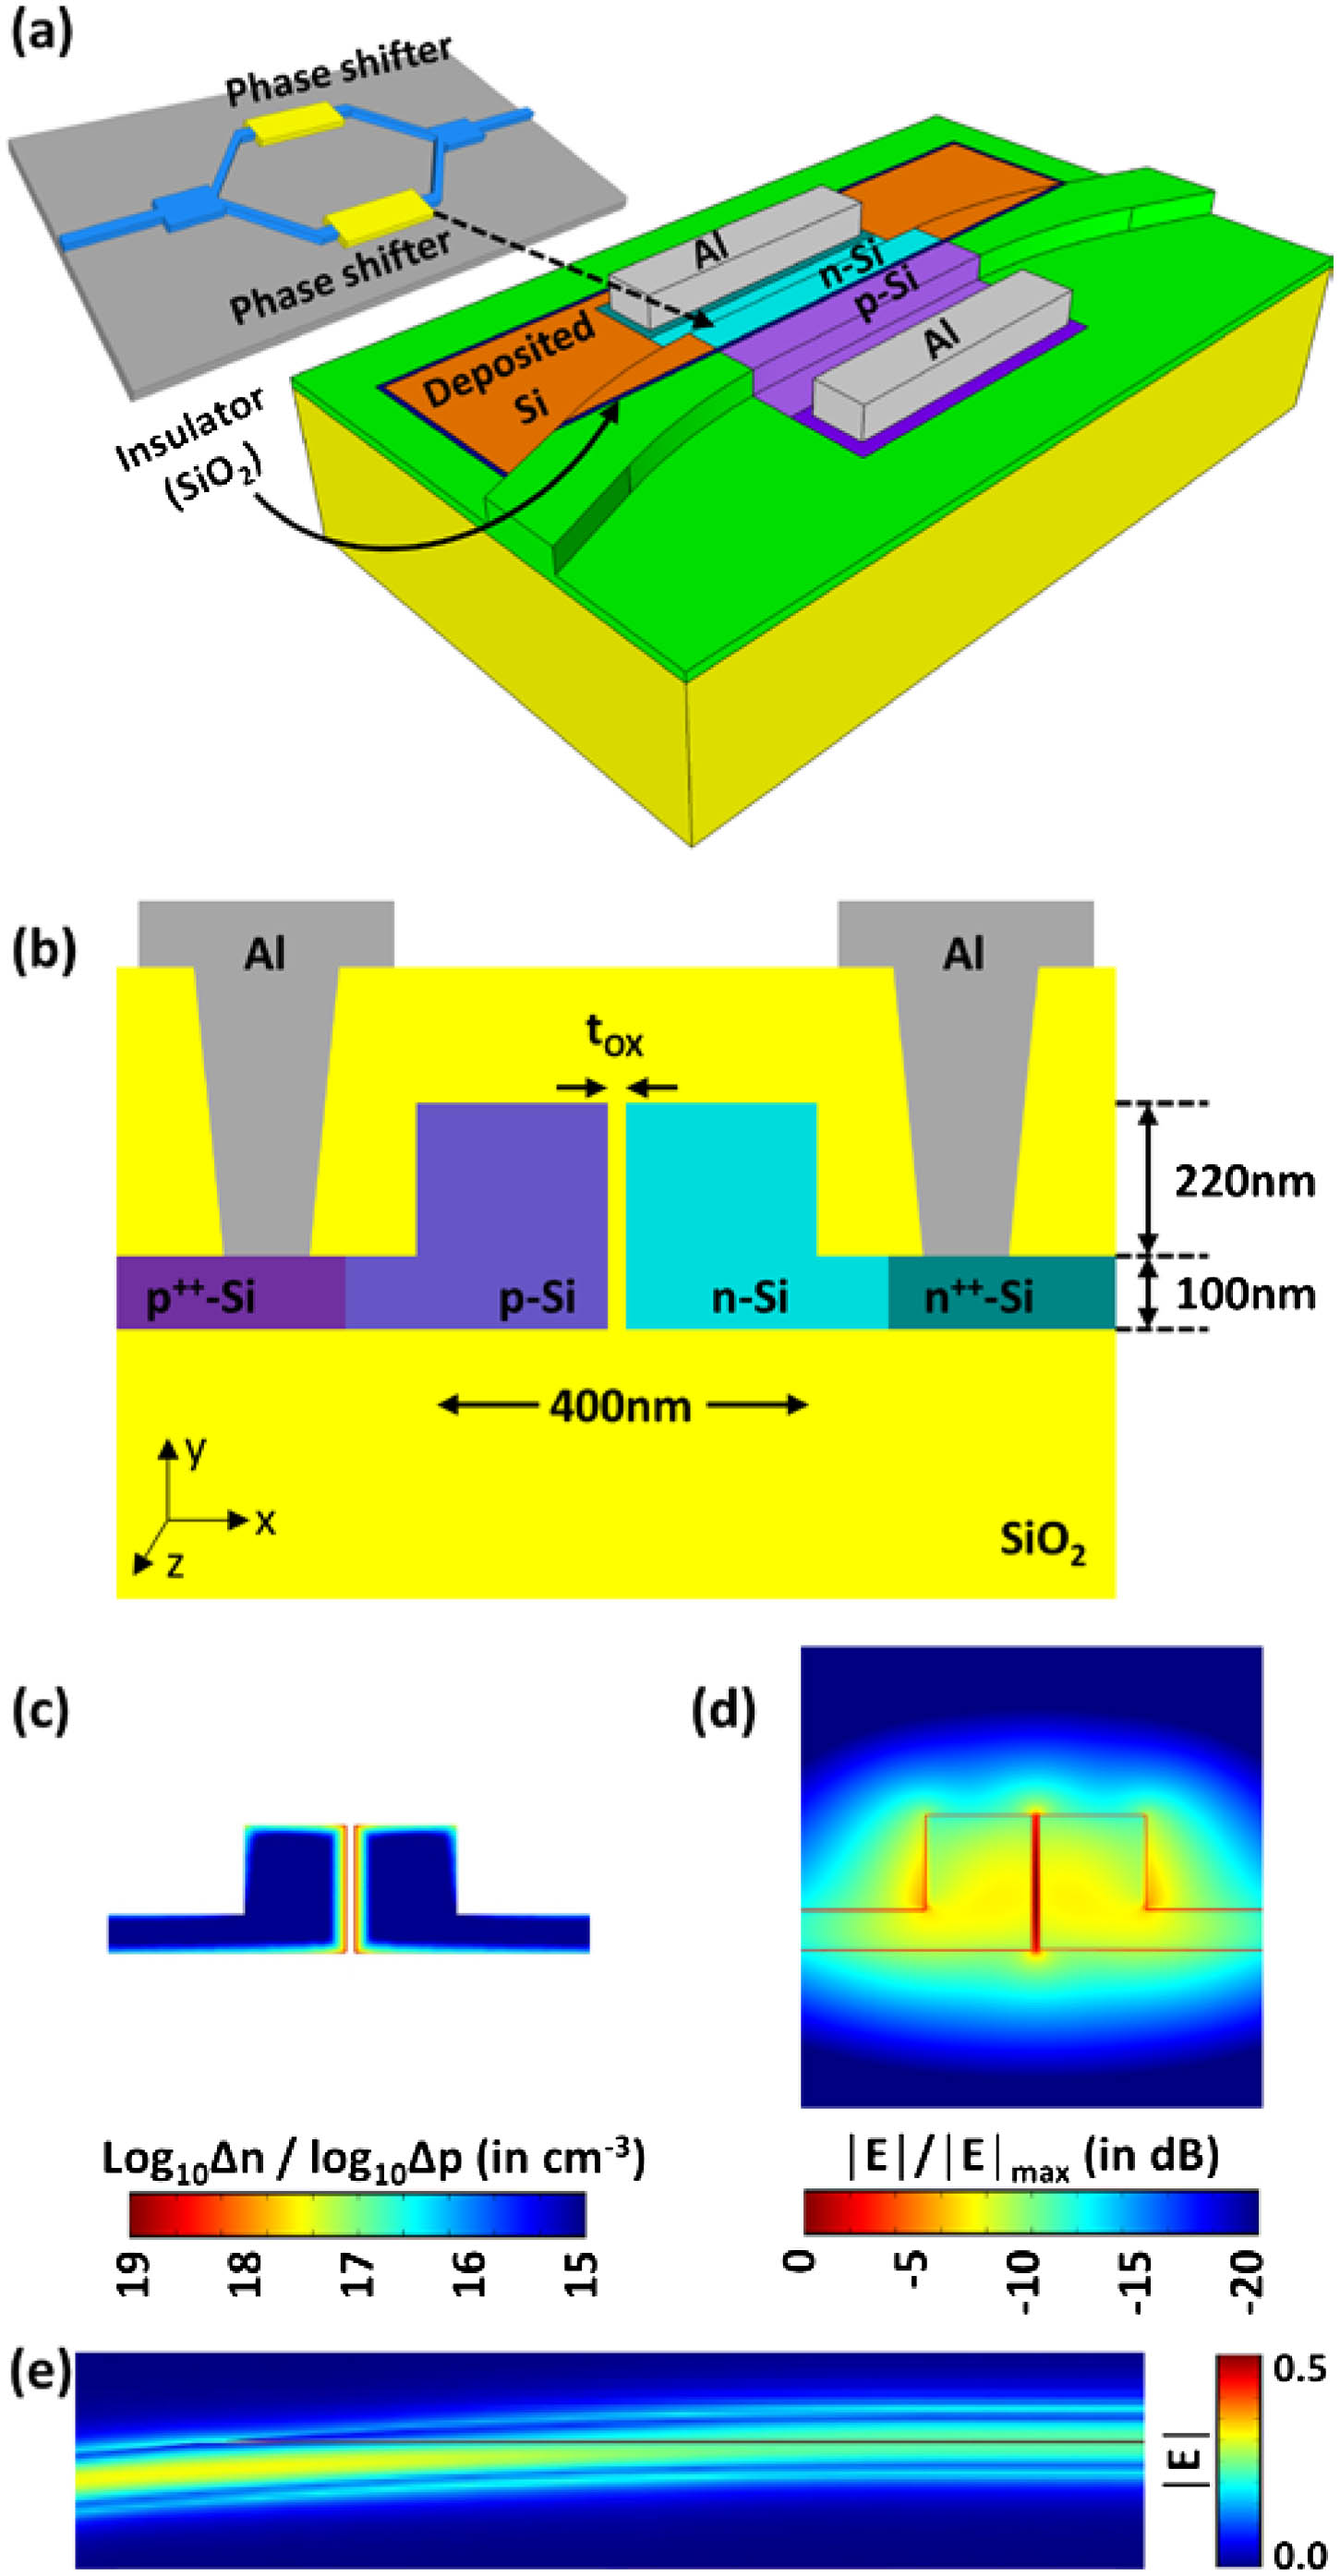 (a) Schematic of the Si/SiO2/Si MOS-capacitor phase shifter. The relative position of the phase shift in an MZI interferometer is highlighted in yellow. (b) Cross-sectional view of the MOS-capacitor structure used for designing the phase modulator. The width and height of the rib waveguide are 400 nm and 320 nm, respectively, and the slab height is 100 nm. The n-Si and p-Si regions have a doping concentration of 1×1018 cm−3. The n++-Si and p++-Si regions have a doping concentration of 1×1020 cm−3 and are positioned 900 nm away from the center of the waveguide. The oxide thickness tox is varied in the design to optimize device performance. (c) Excess carrier concentration distribution (in log scale) due to an applied bias of 4 V. (d) Normalized dominant electric field (|Ex|) profile (in dB) of the fundamental TE mode centered around the oxide slot region. (e) Simulated electric field (|Ex|) propagation from the rib waveguide region to the slot-waveguide region.